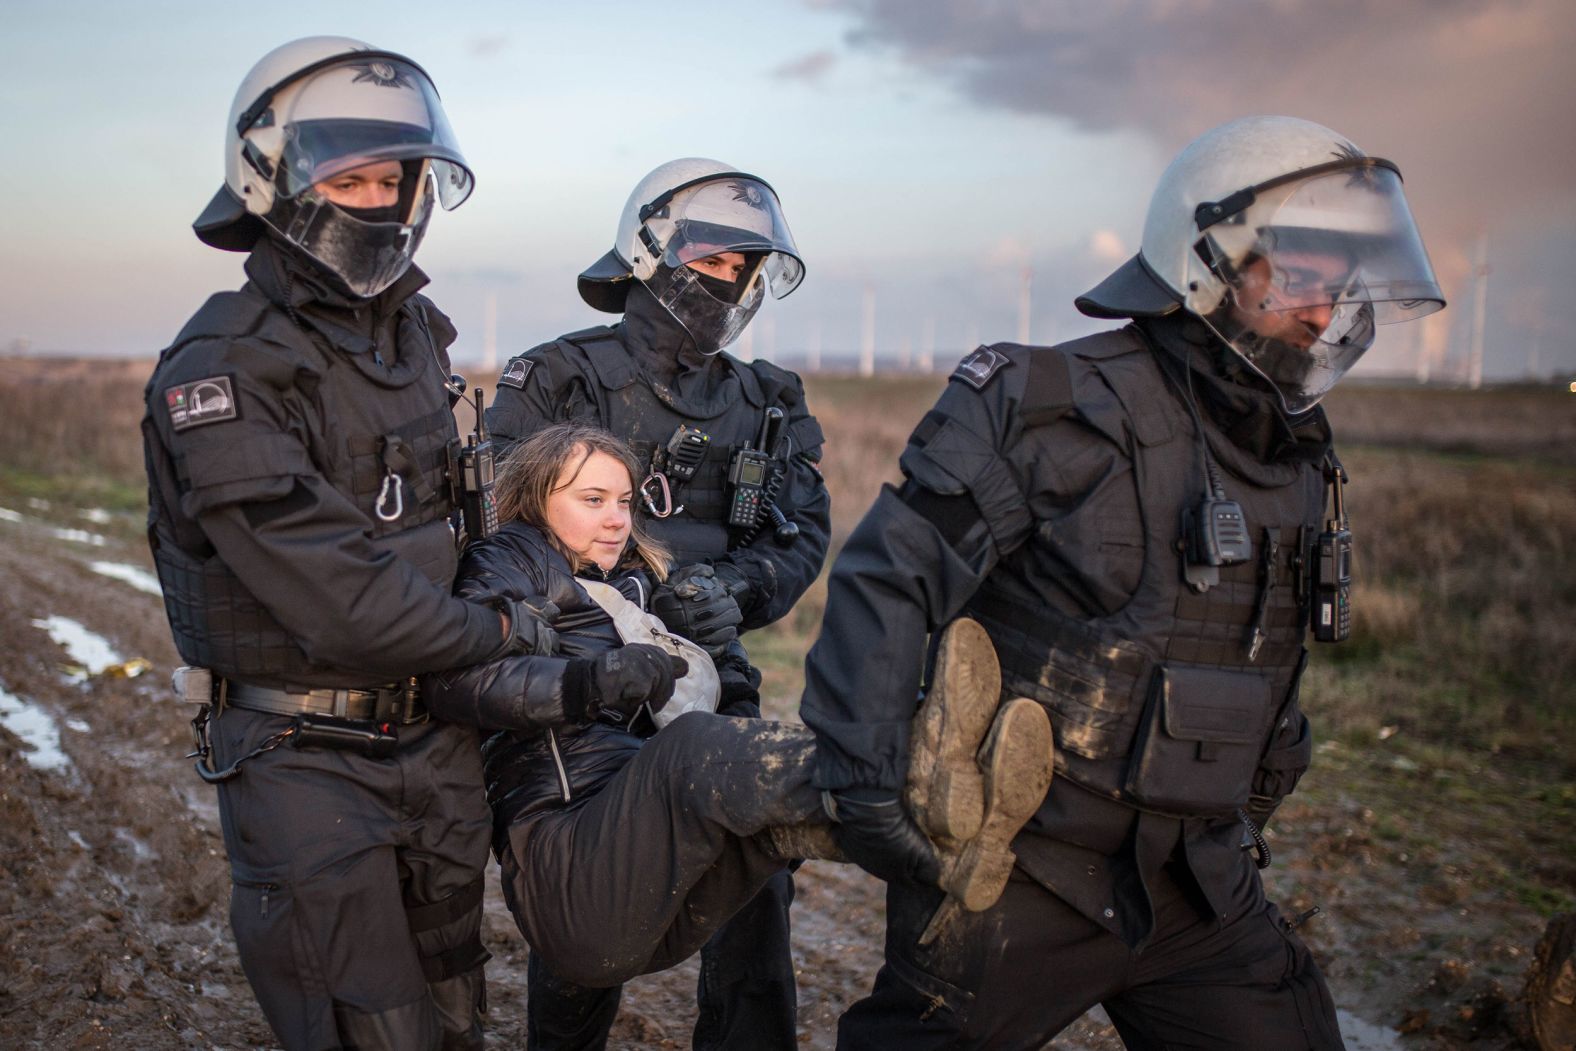 Police officers detain climate activist Greta Thunberg at a demonstration against the expansion of the Garzweiler coal mine in Lützerath, Germany, on Tuesday, January 17.